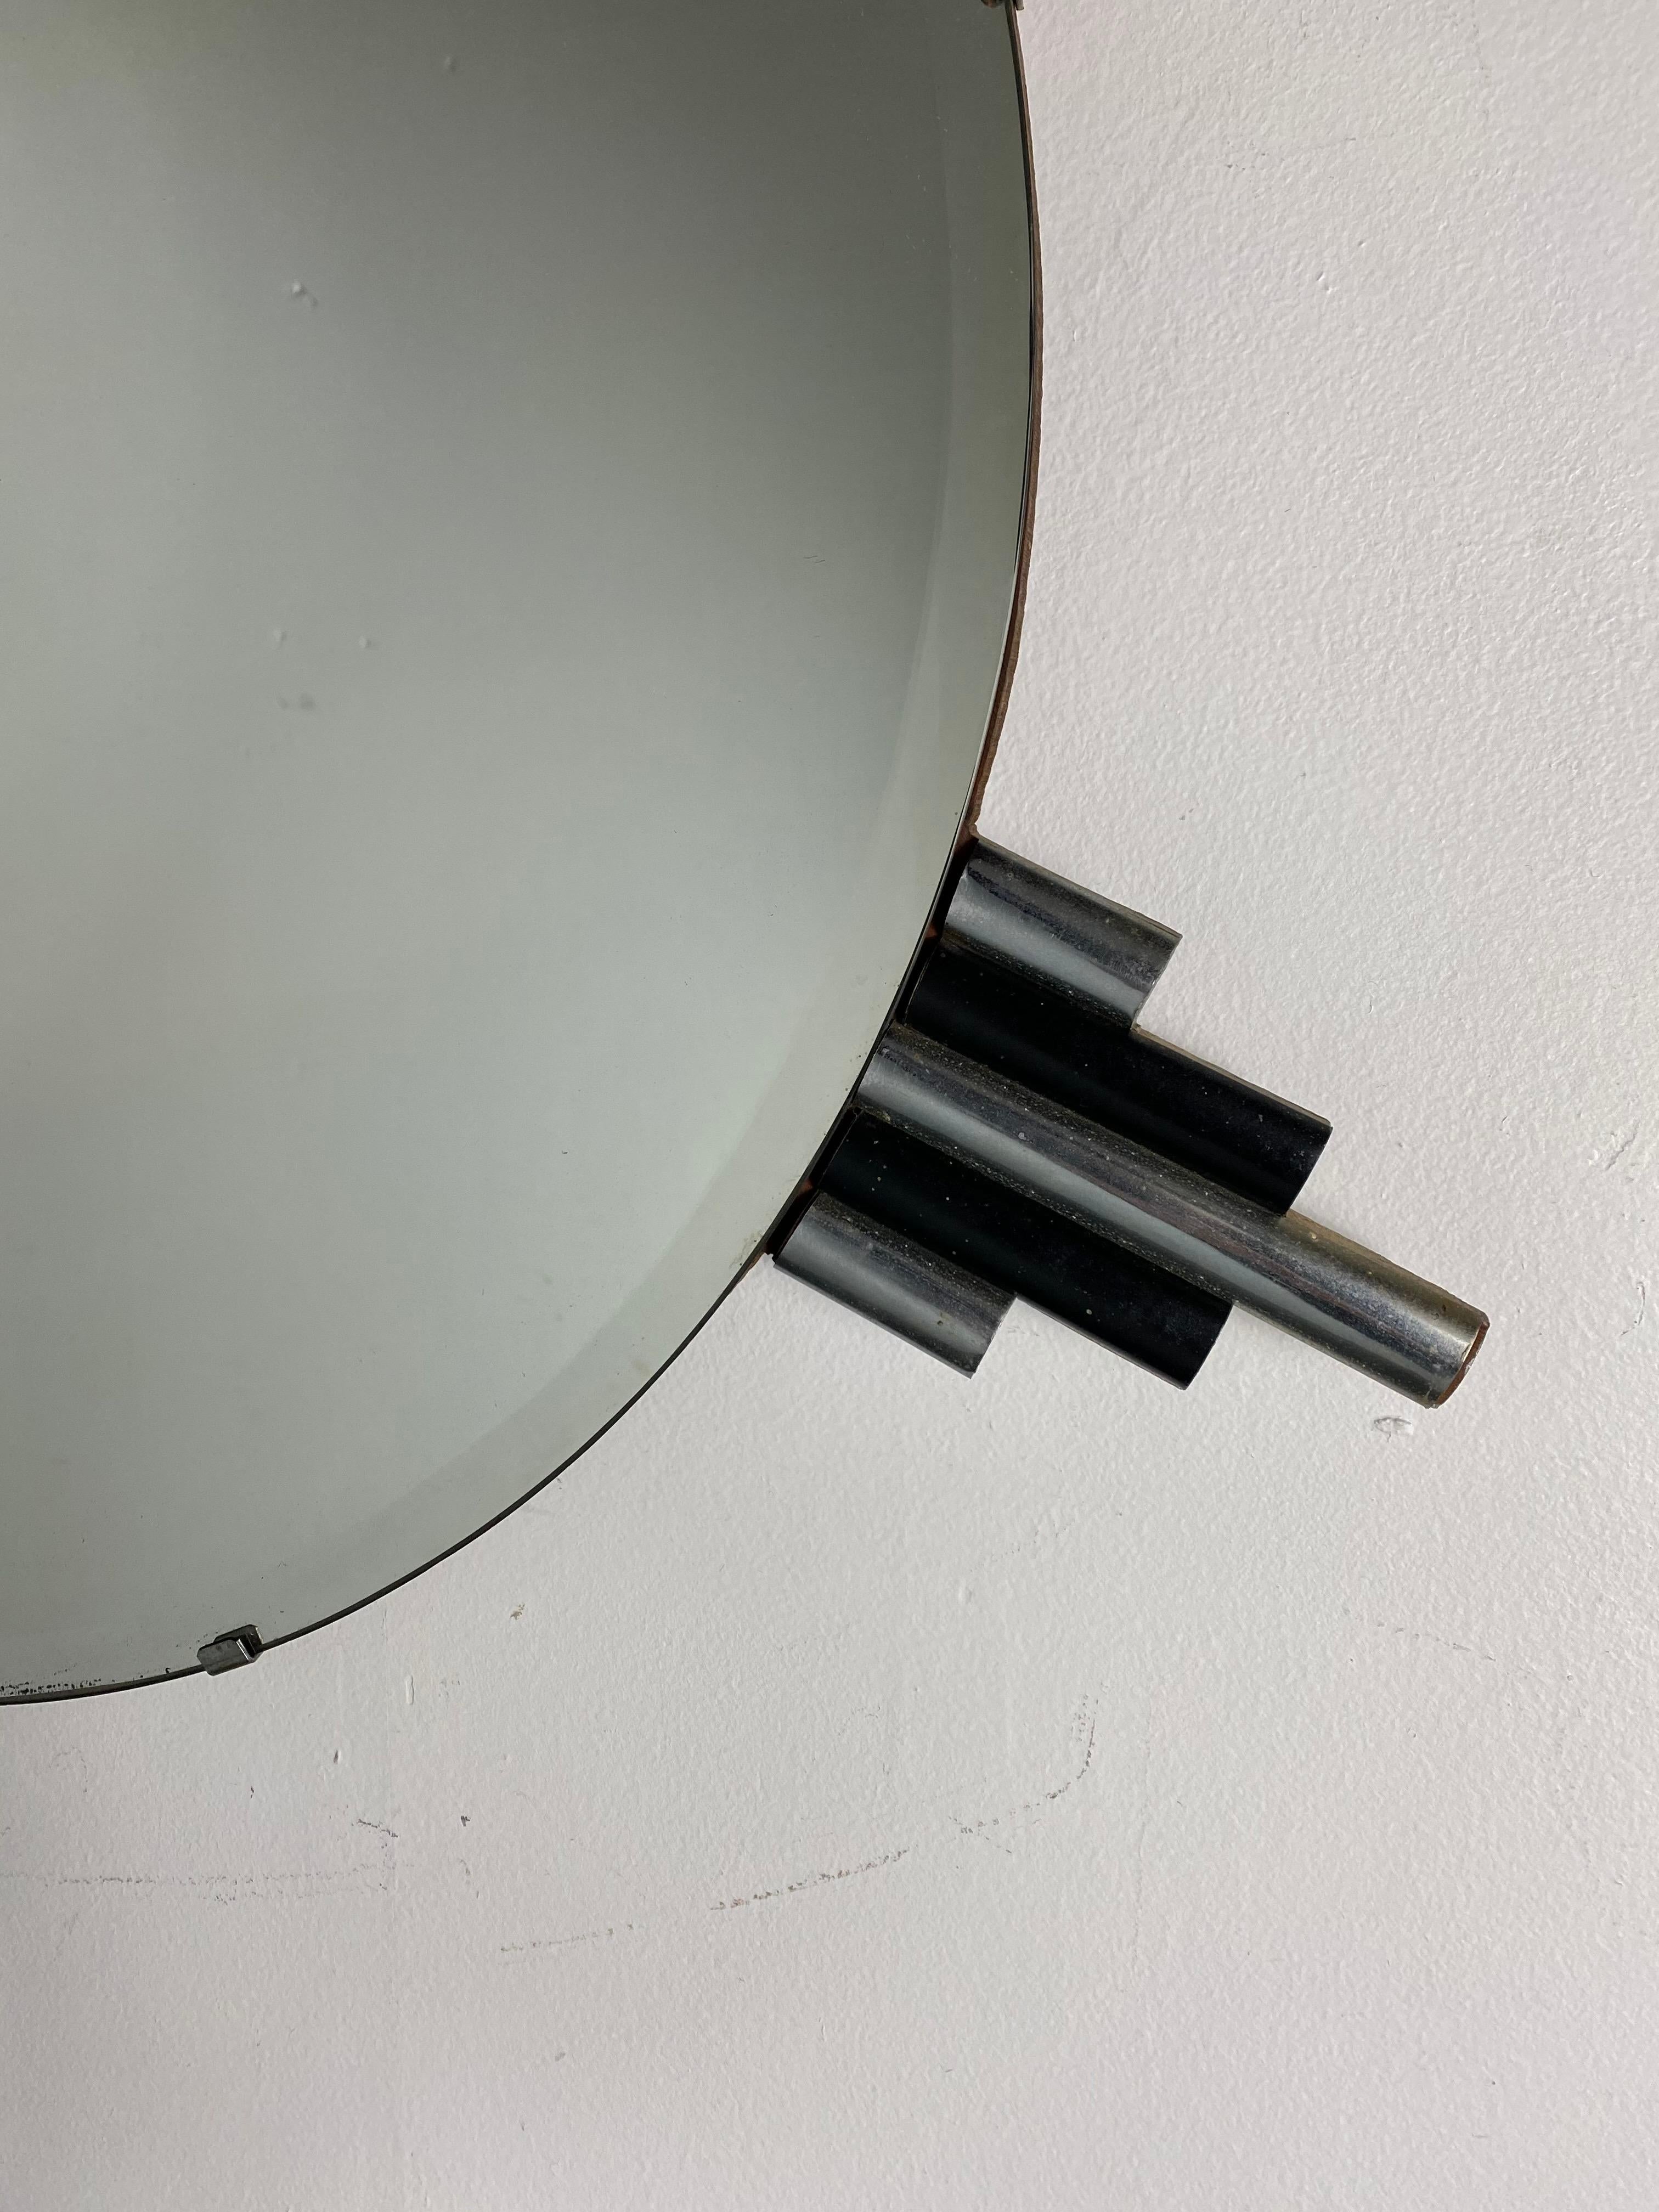 Beveled Unusual Art Deco Wall Mirror with Black and Chrome Sky-Scraper Sides For Sale